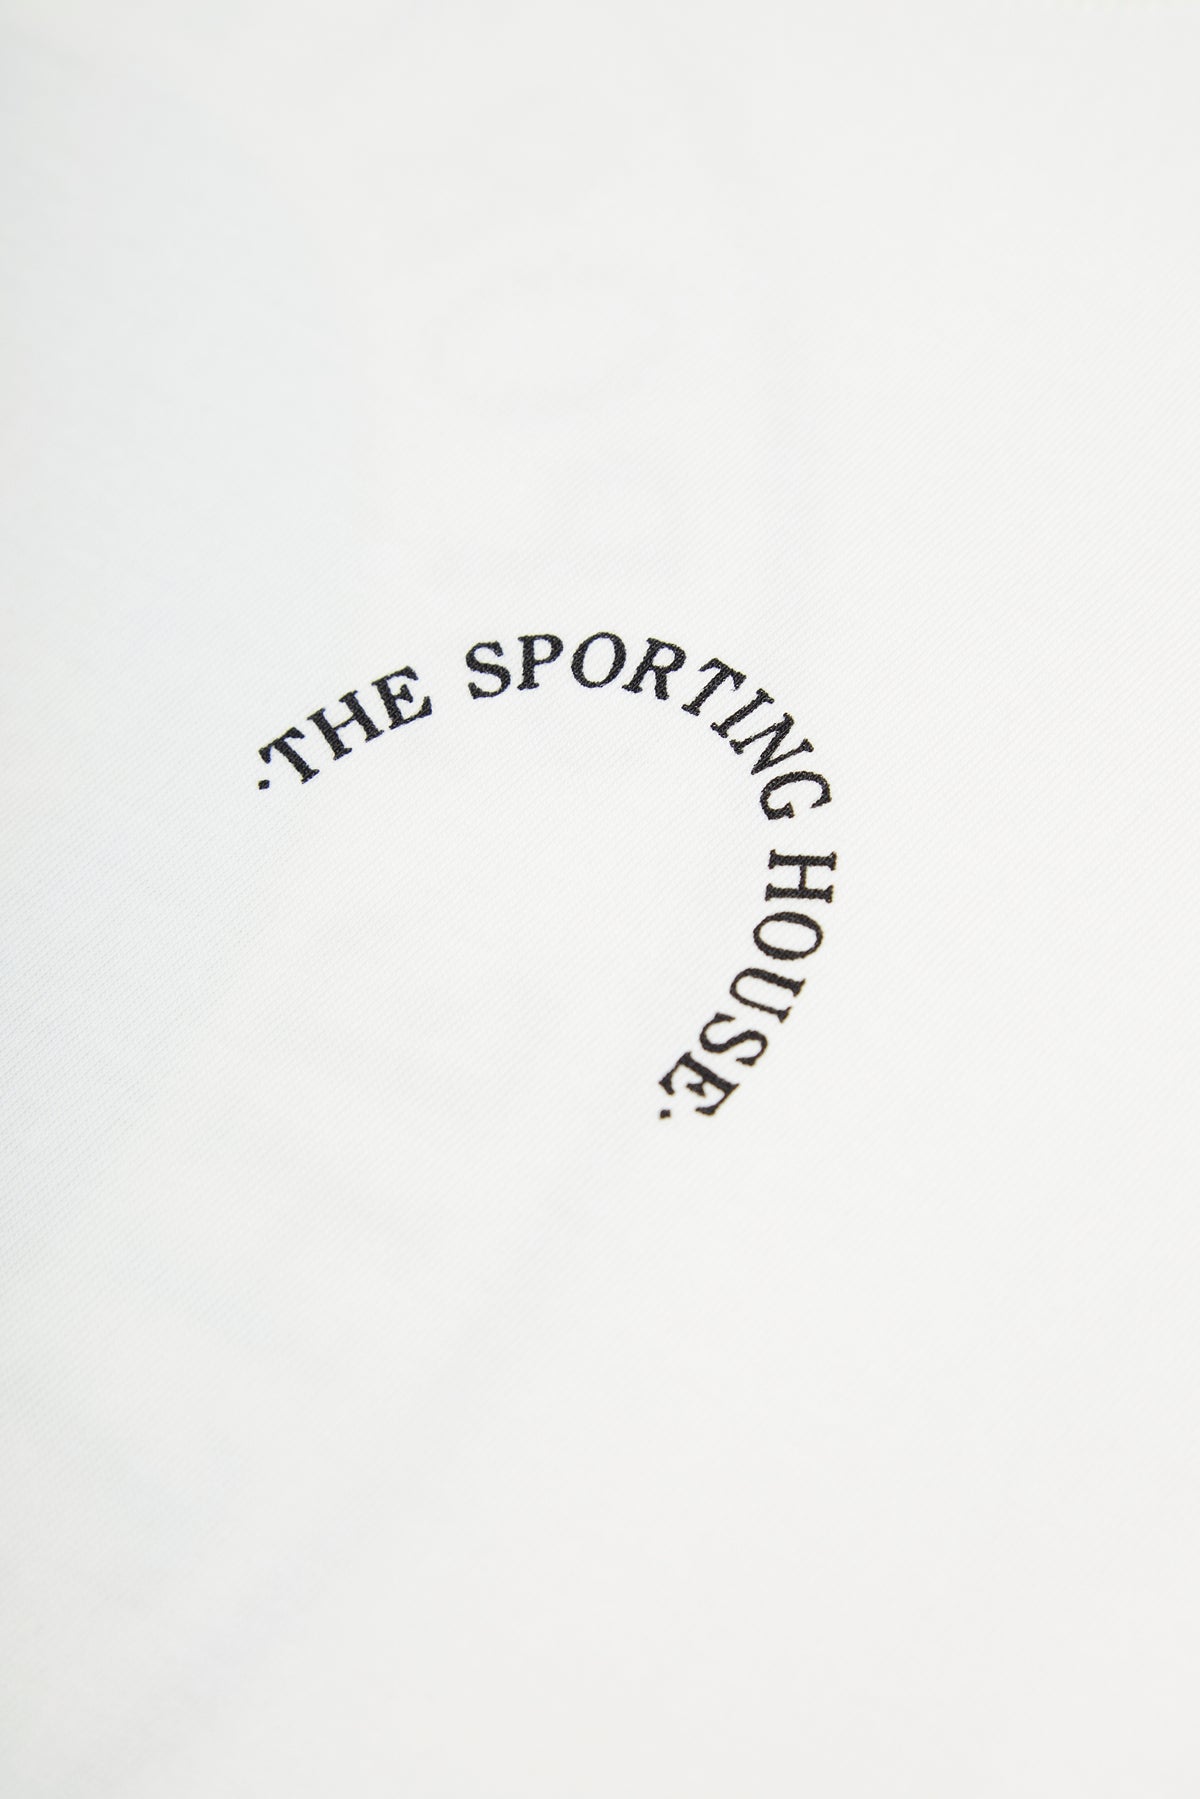 TEE-SHIRT GRAPHIQUE SPORTING HOUSE